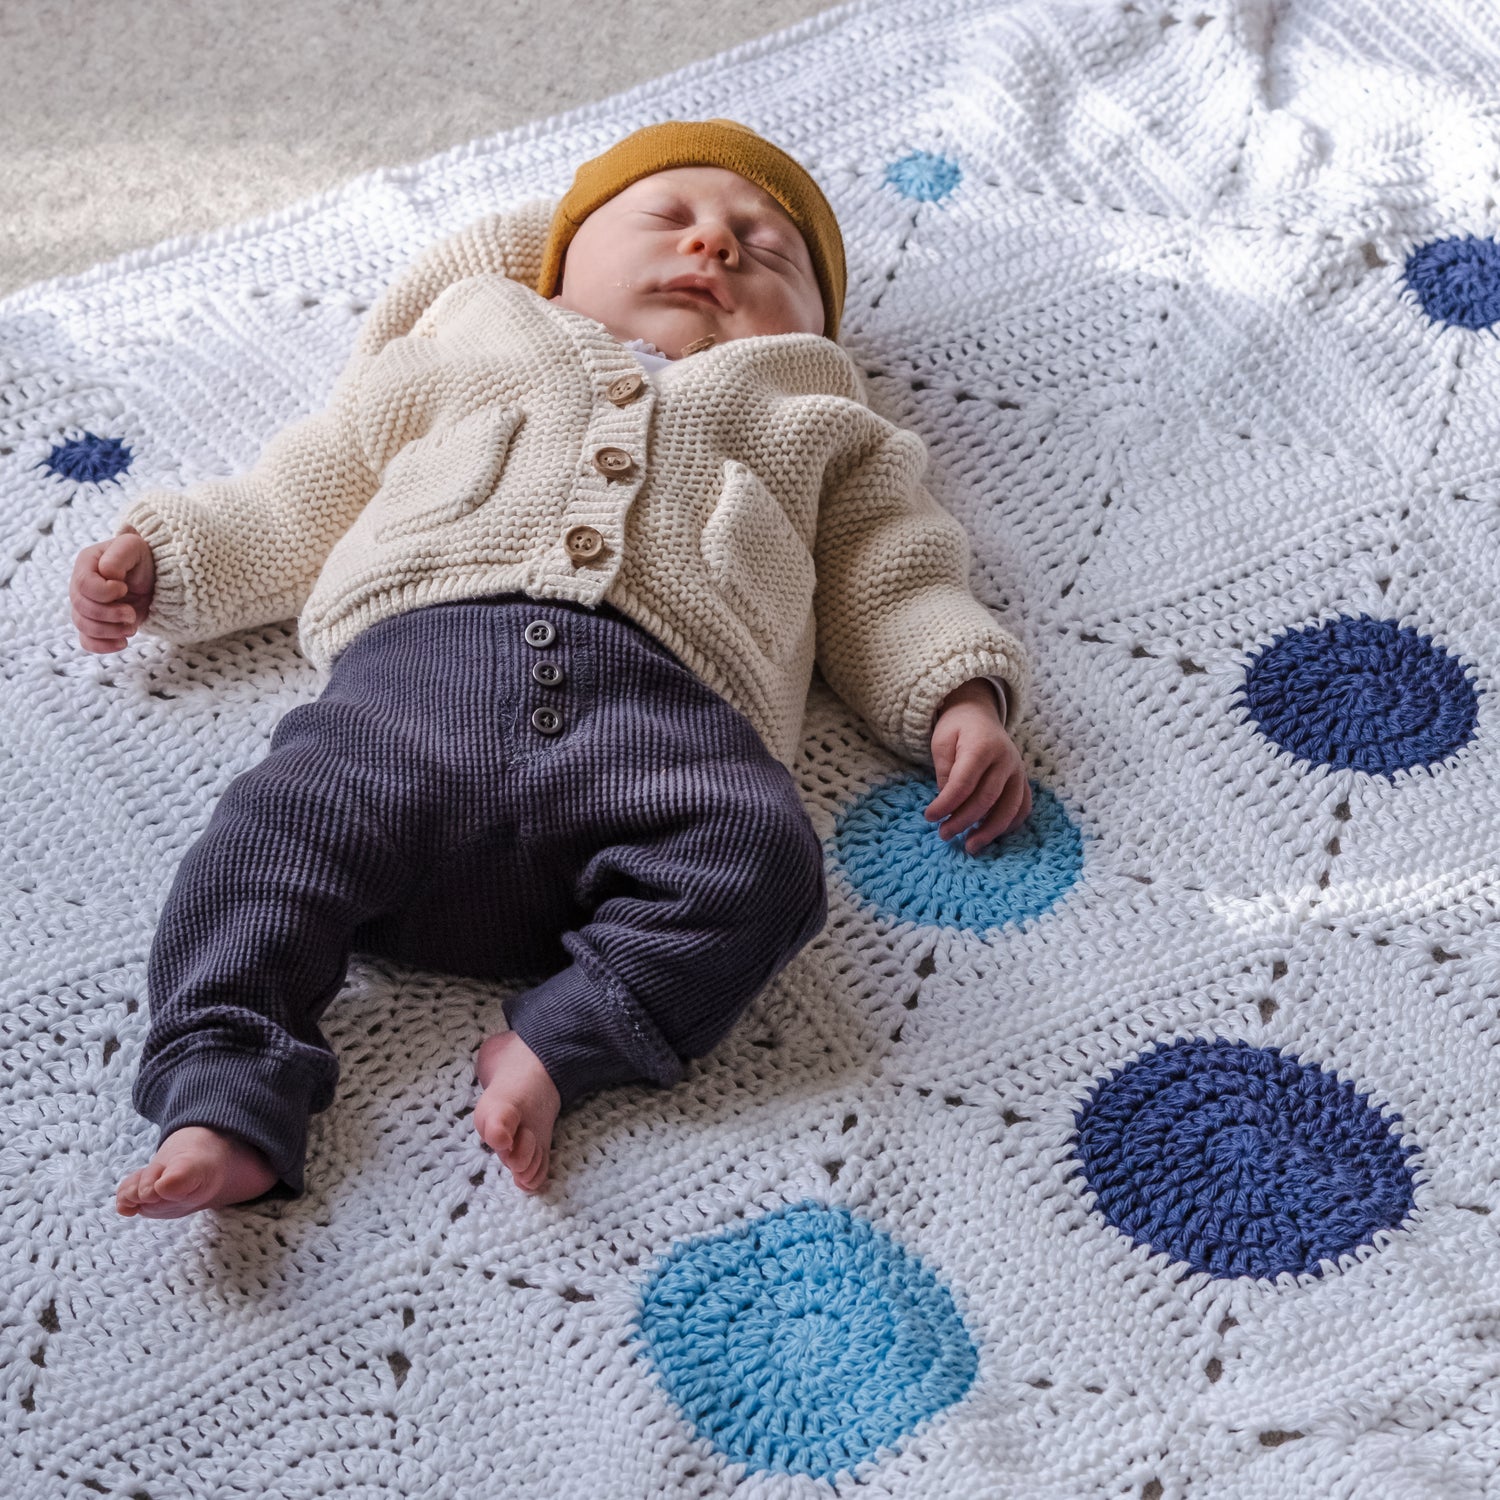 Small baby naps on their back on a white cotton Dotty Spotty Blanket with two shades of blue circles and white on white circles on a carpeted floor.